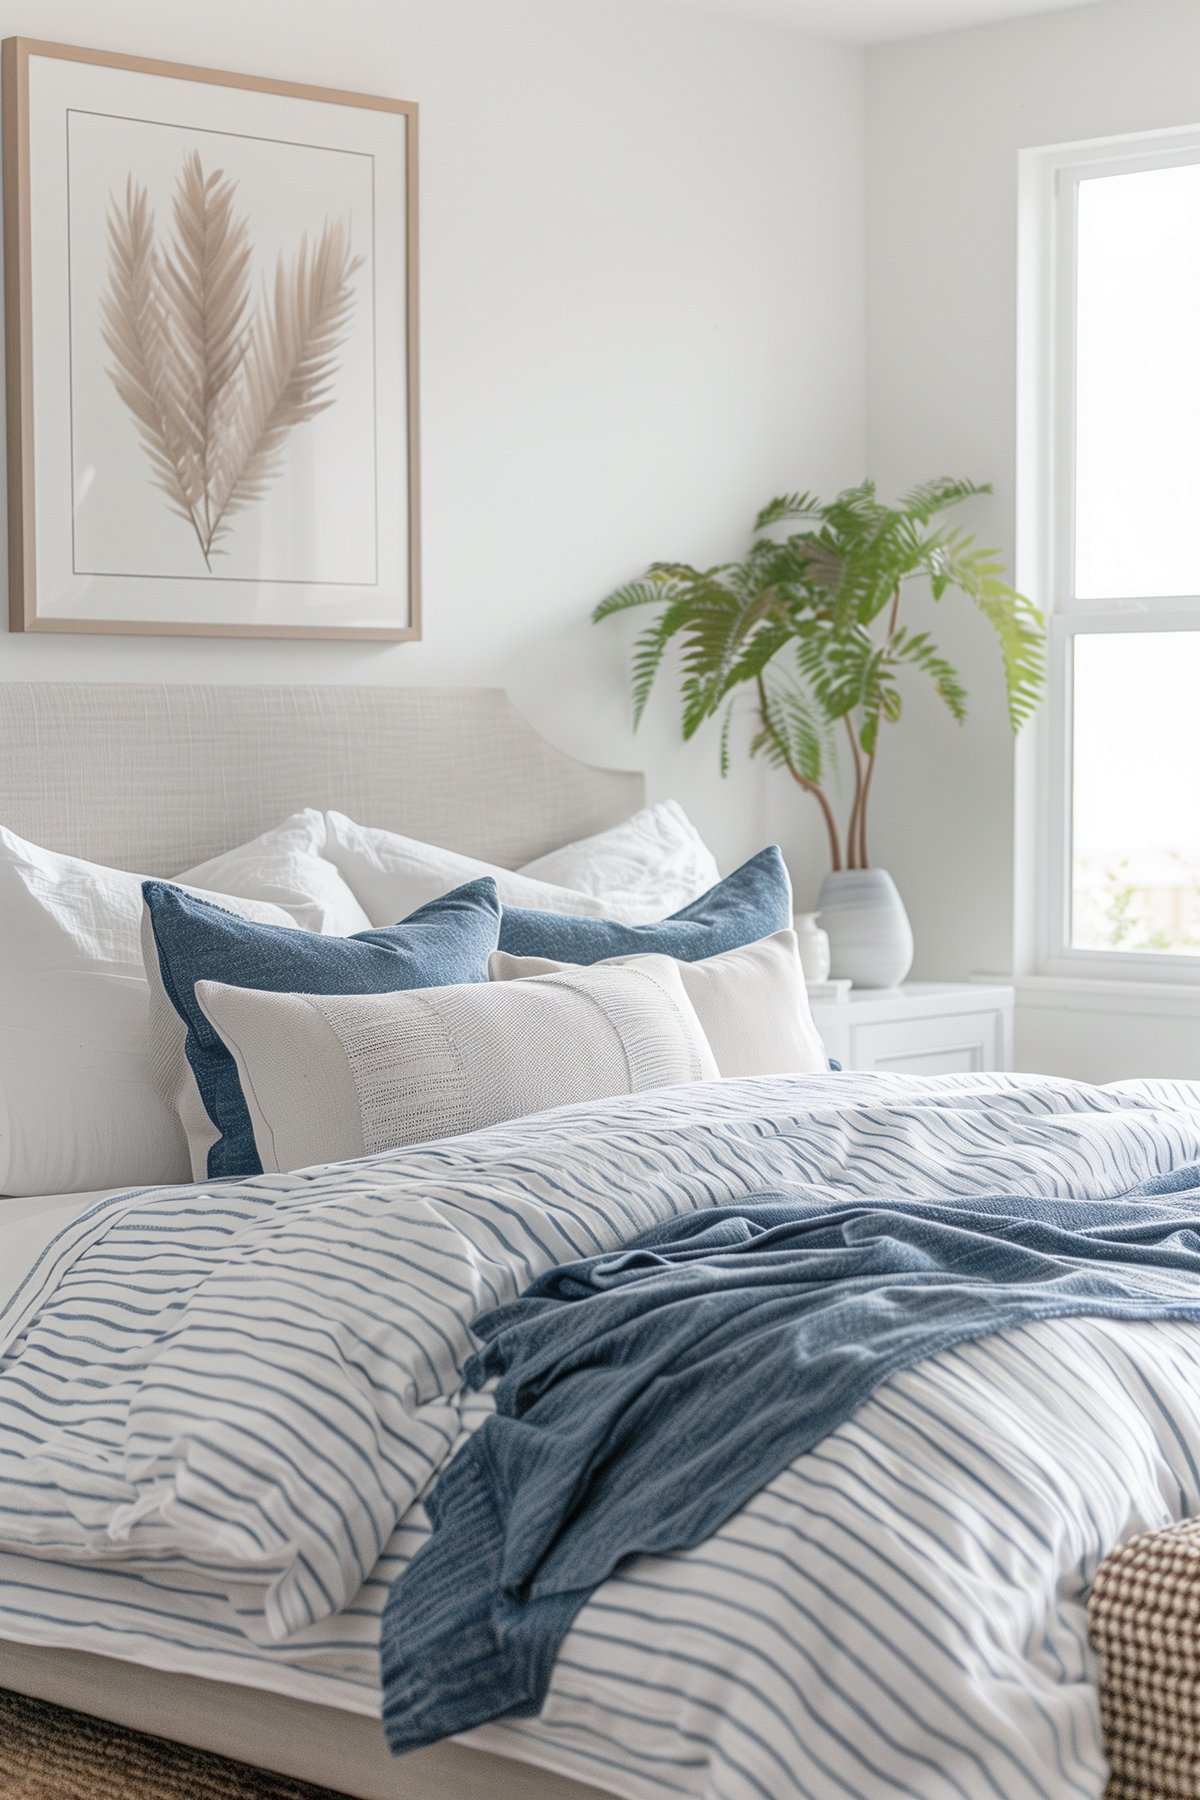 striped bedding on a bed with a blue throw on the end of the bed.